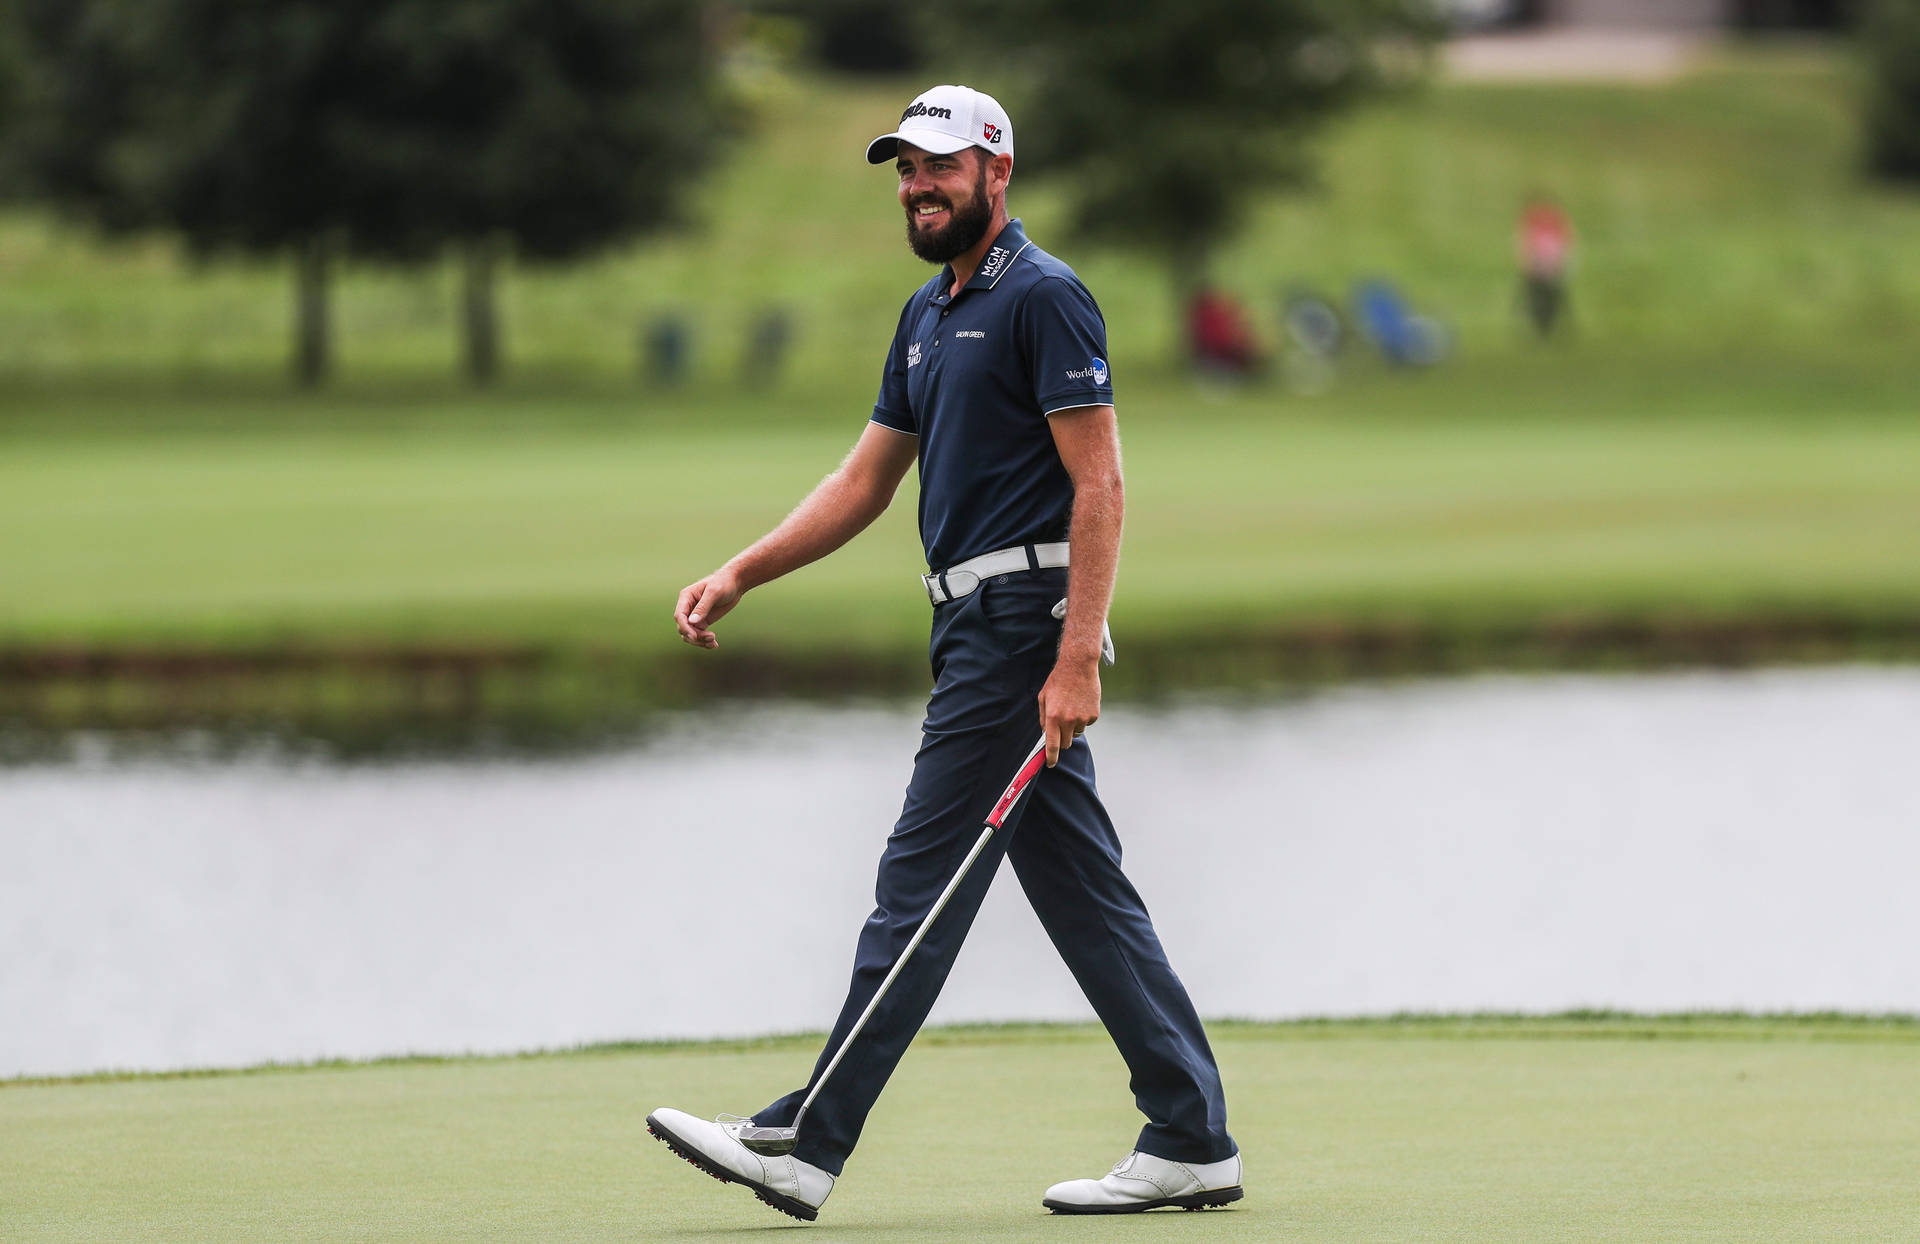 Troy Merritt, Smiling and Enjoying His Walk on the Golf Course Wallpaper